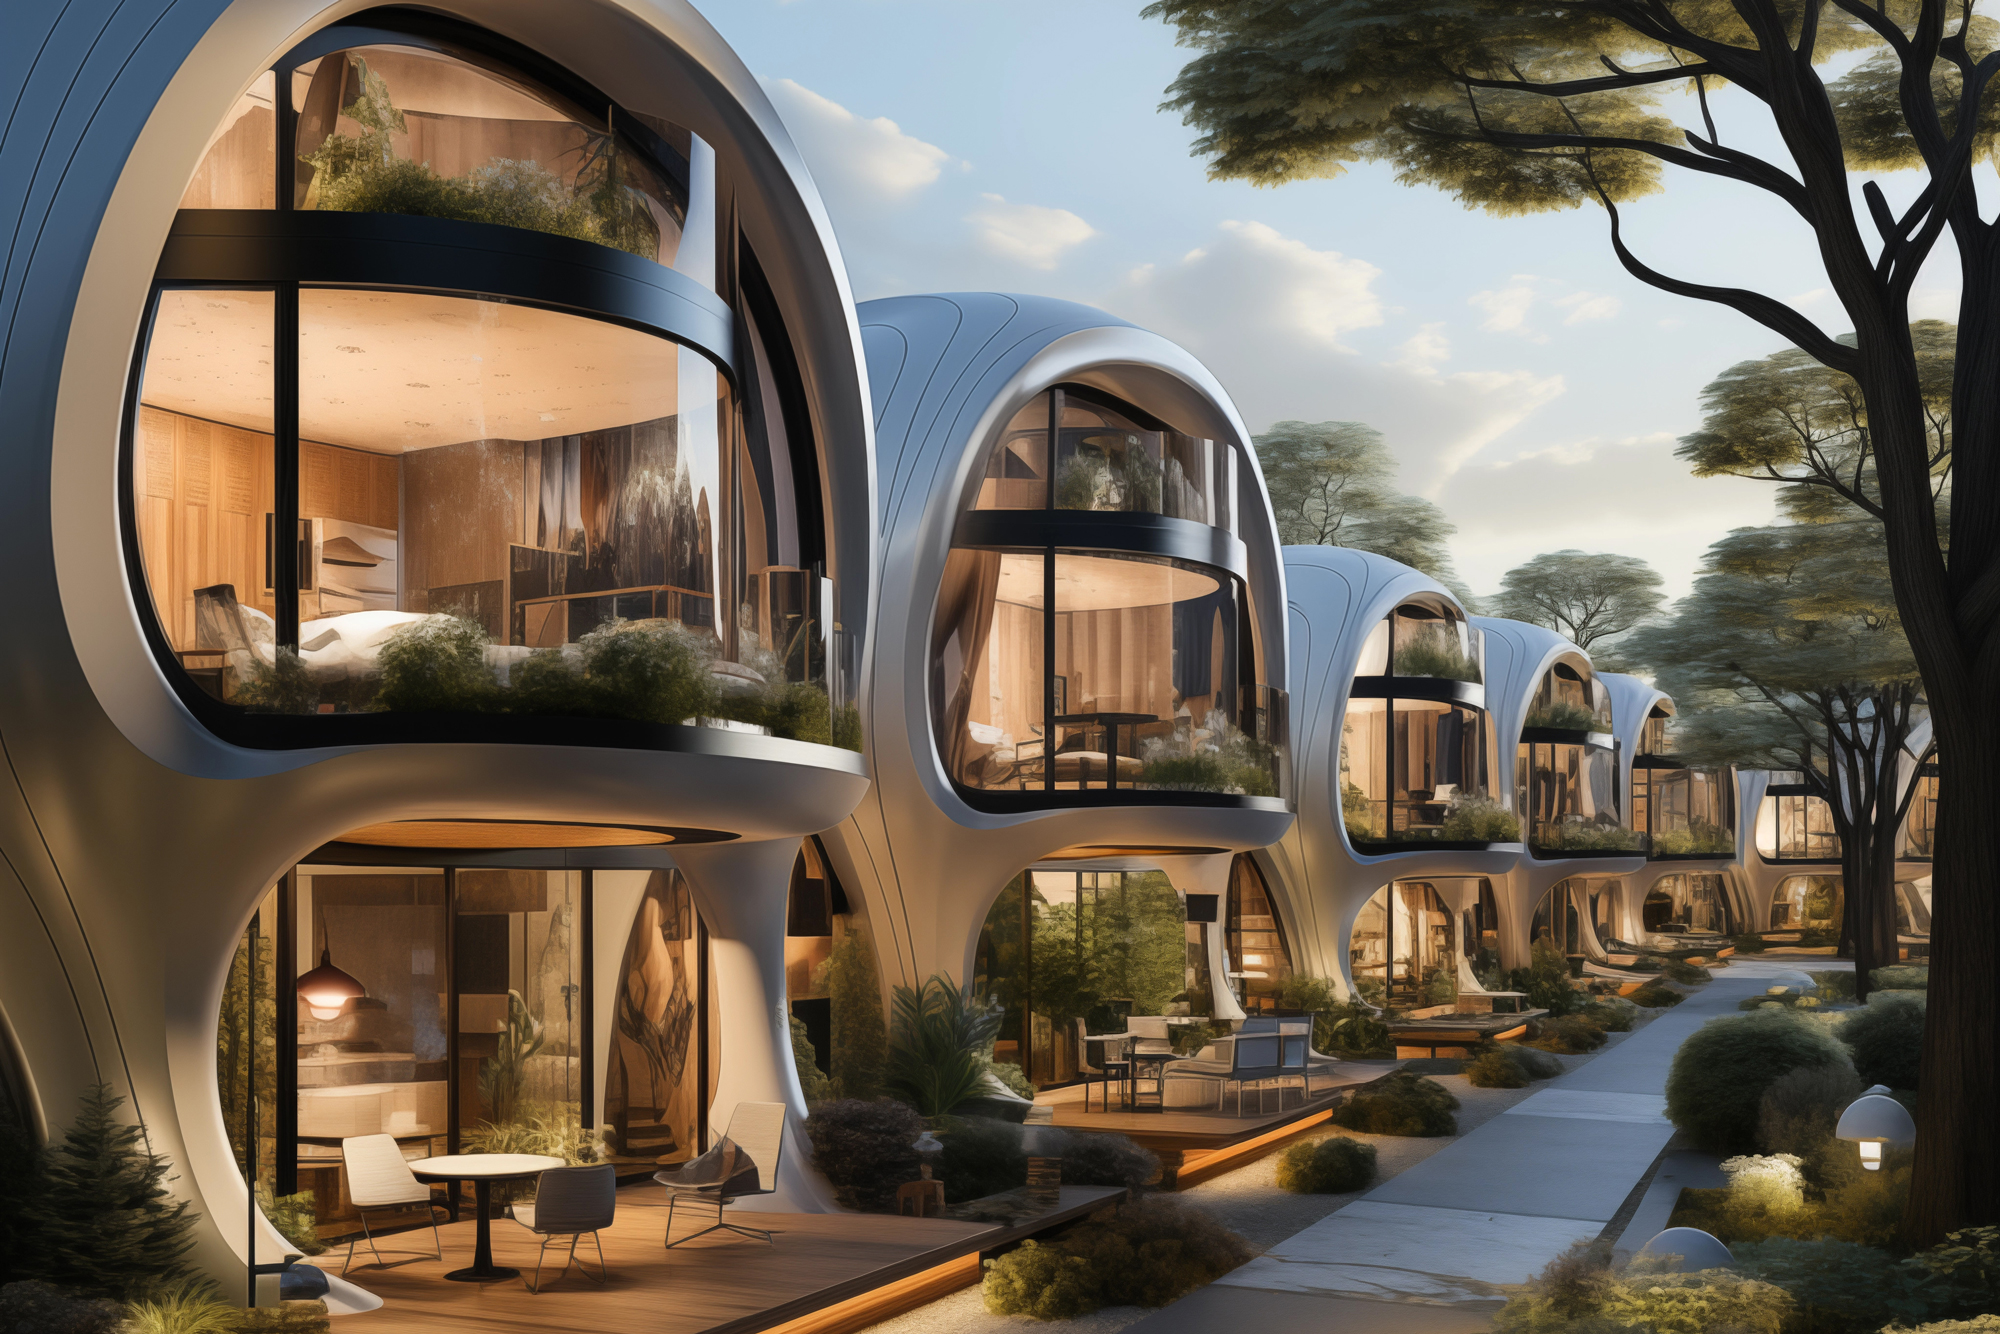 A row of futuristic 3D-printed homes nestled beneath lush trees, showcasing innovative housing solutions for affordable and inclusive communities.